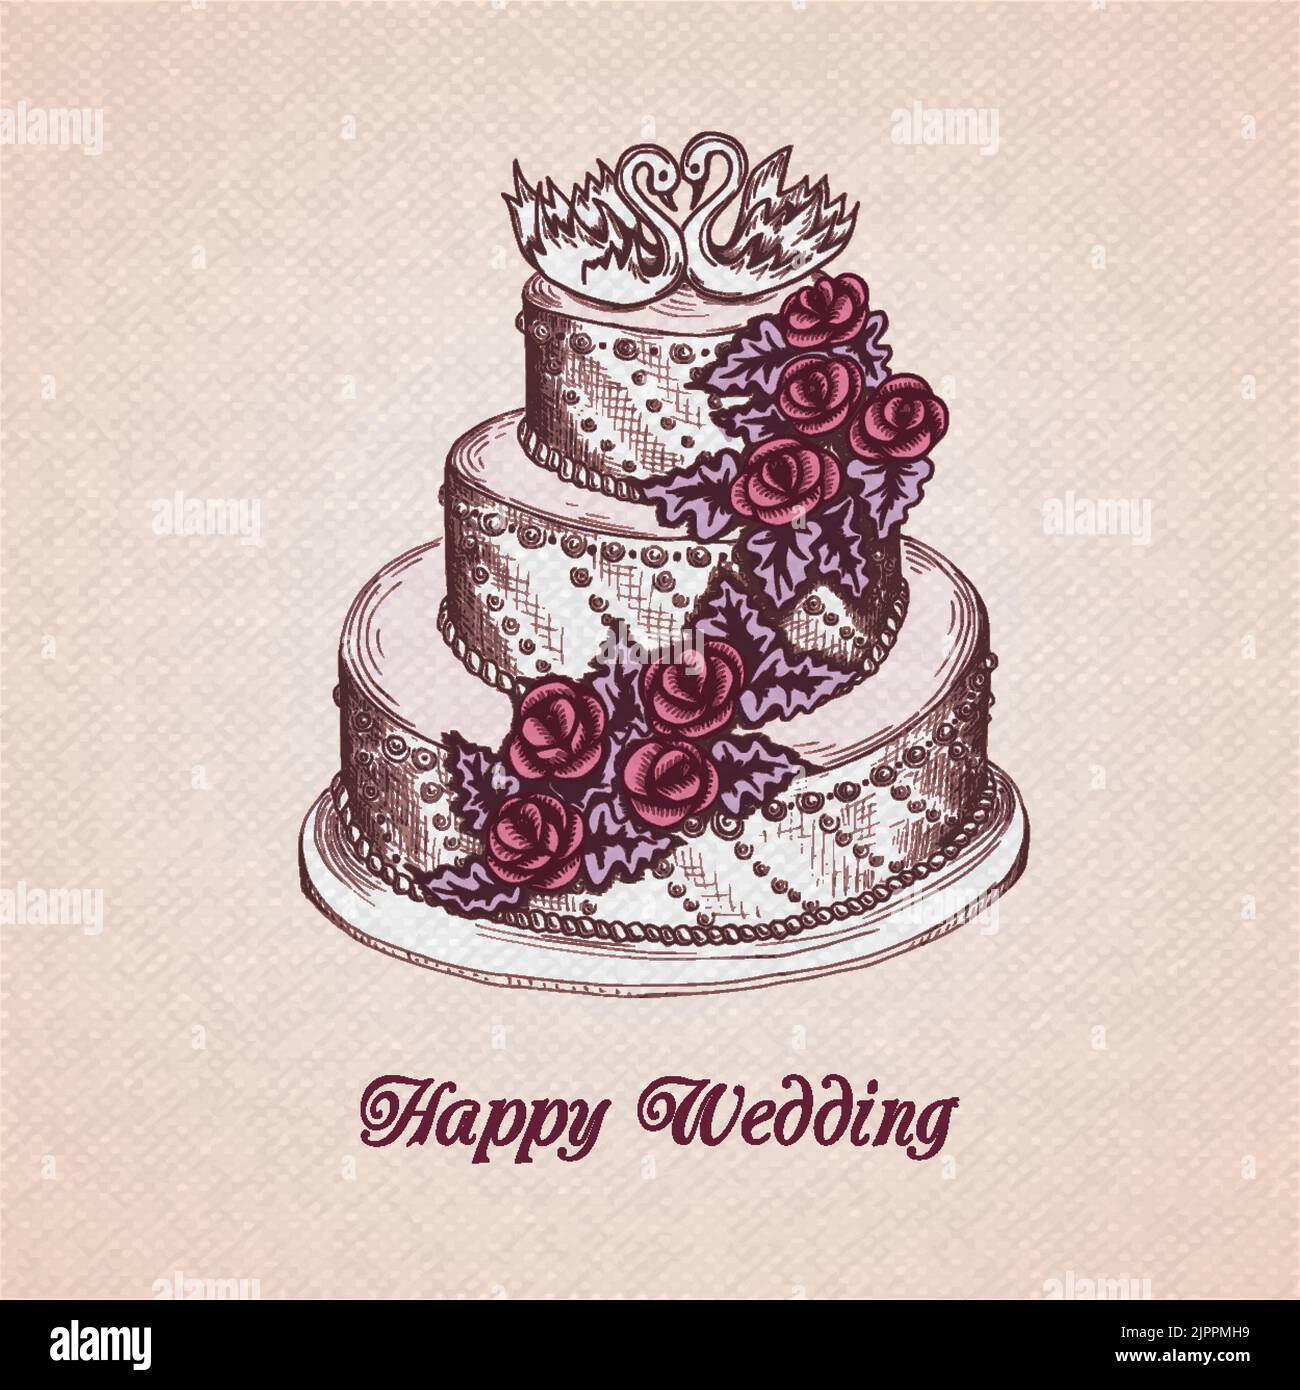 Happy wedding greeting card with cake decorated with cream flower garland and swans vector illustration Stock Vector